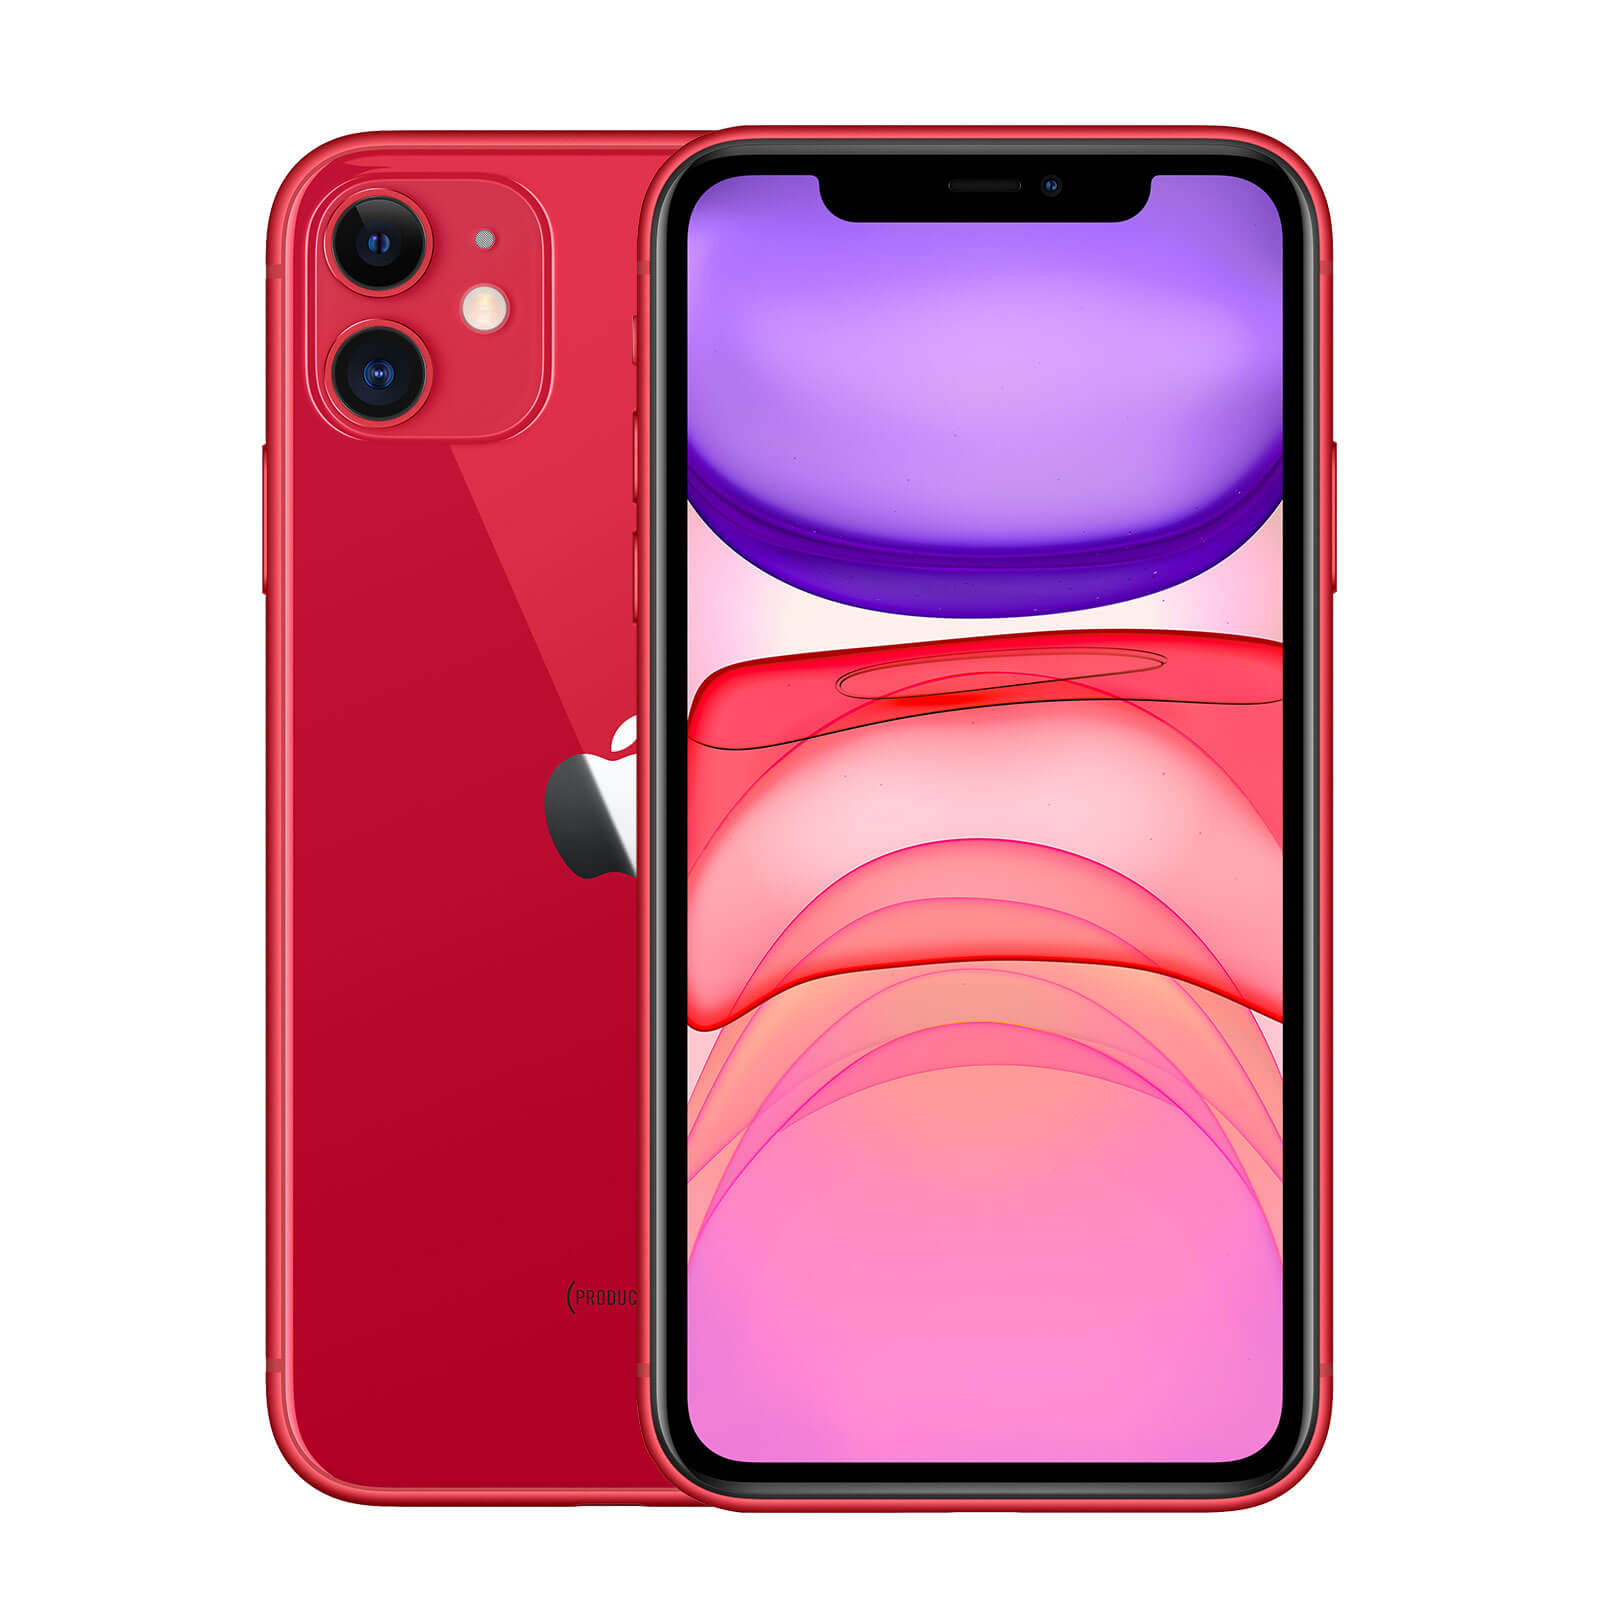 Apple iPhone 11 64GB Product Red Makellos - Ohne Vertrag